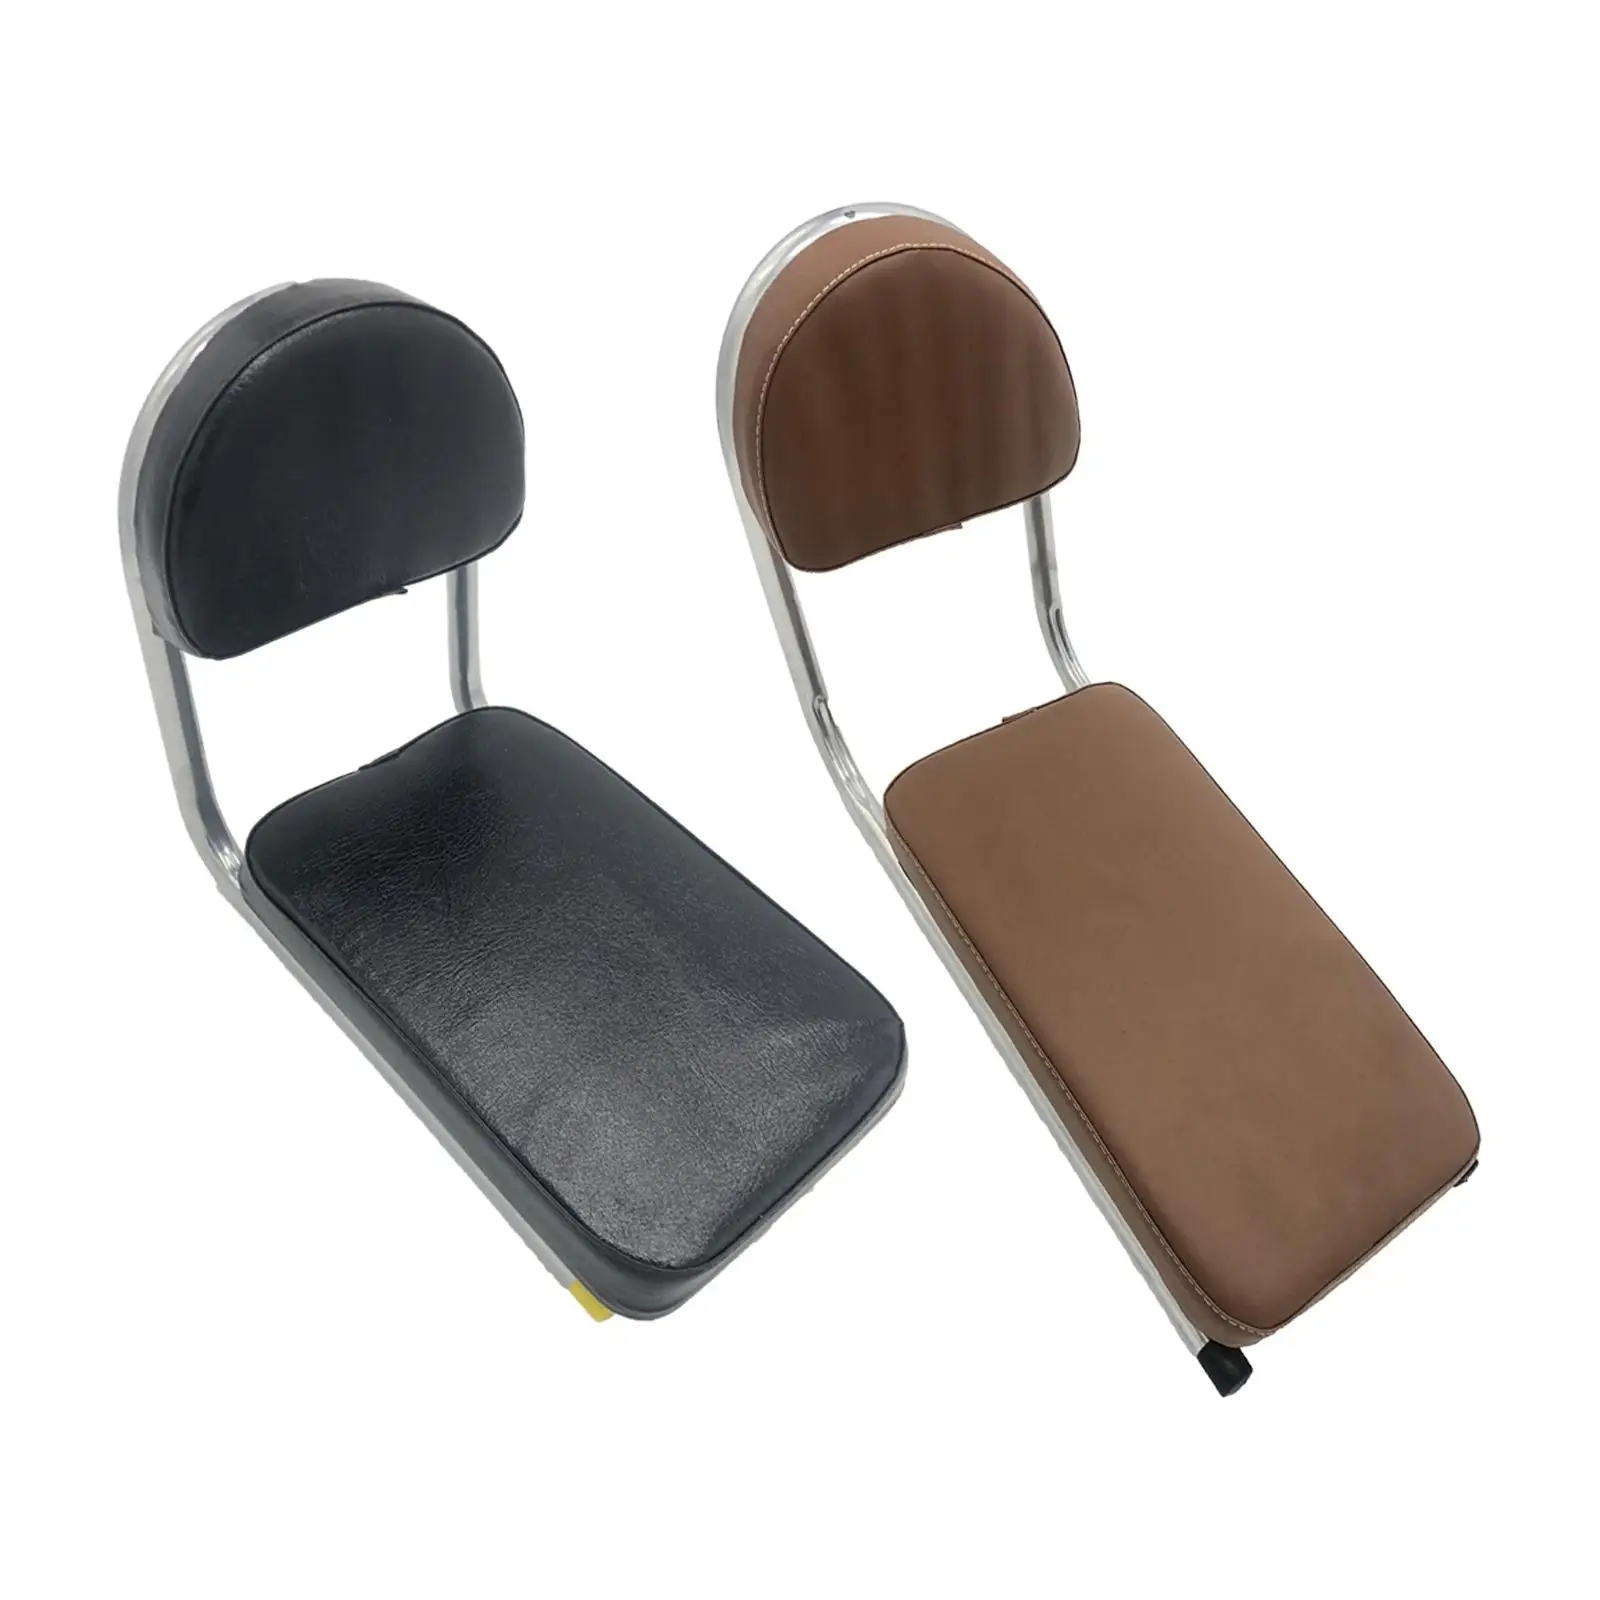 Bicycle Rear Seat Cushion PU Leather Comfortable Portable with Back Rest Back Saddle for Travel Biking Touring Riding Supplies